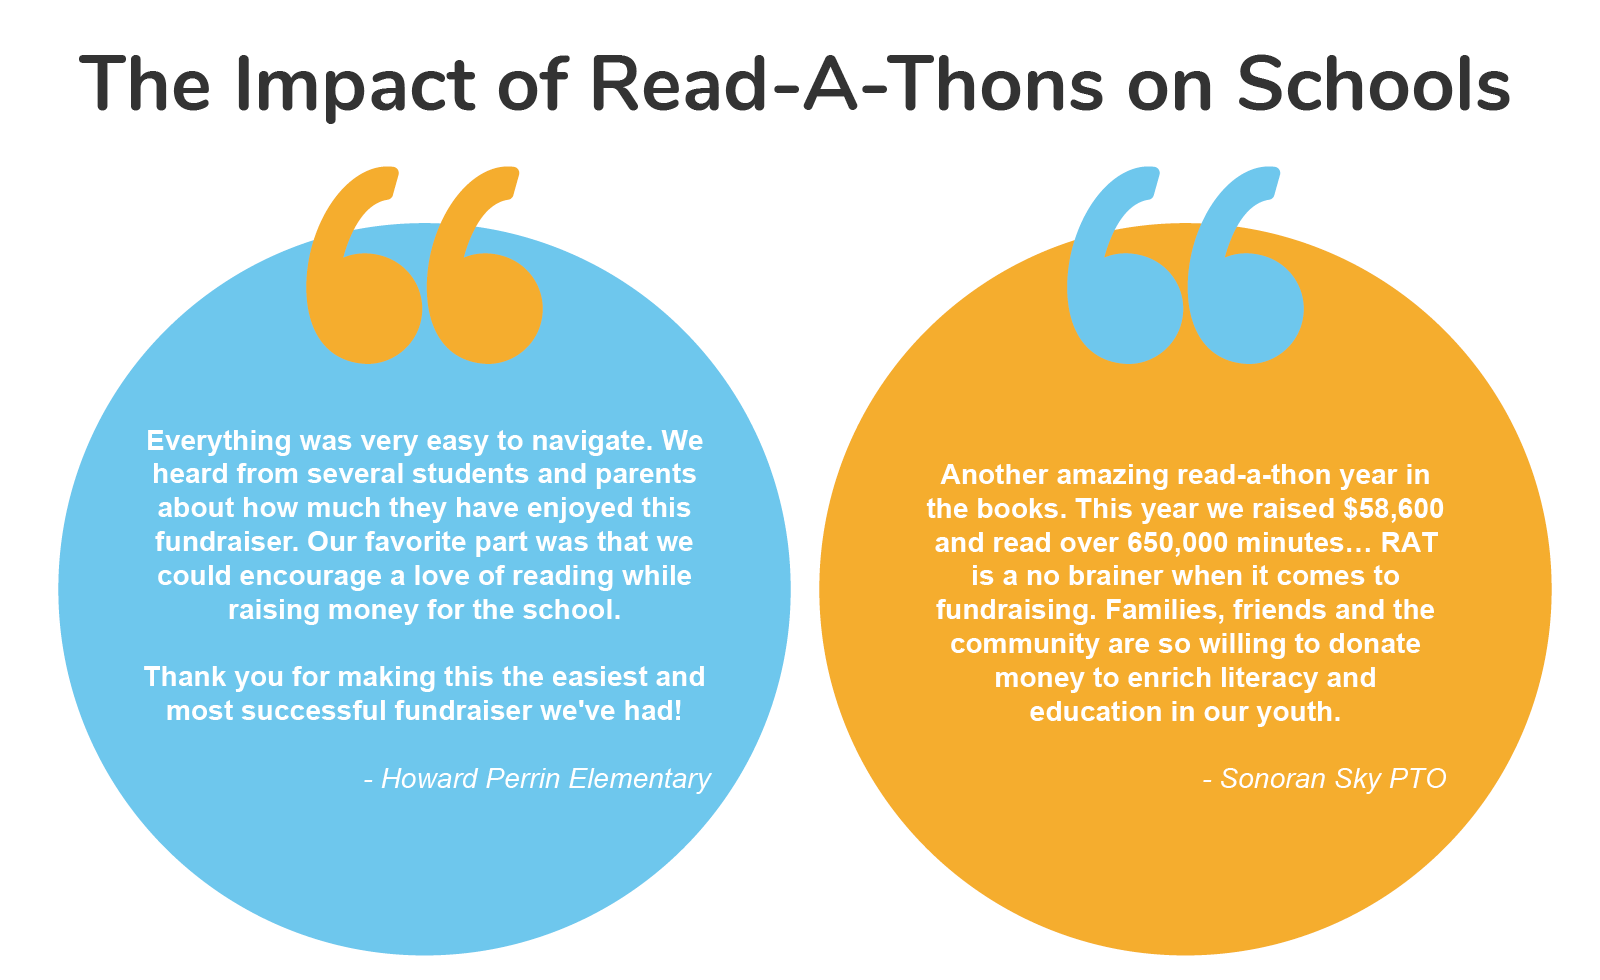 Read-A-Thon testimonials that demonstrate how effective these fundraisers can be as a Read Across America activity.